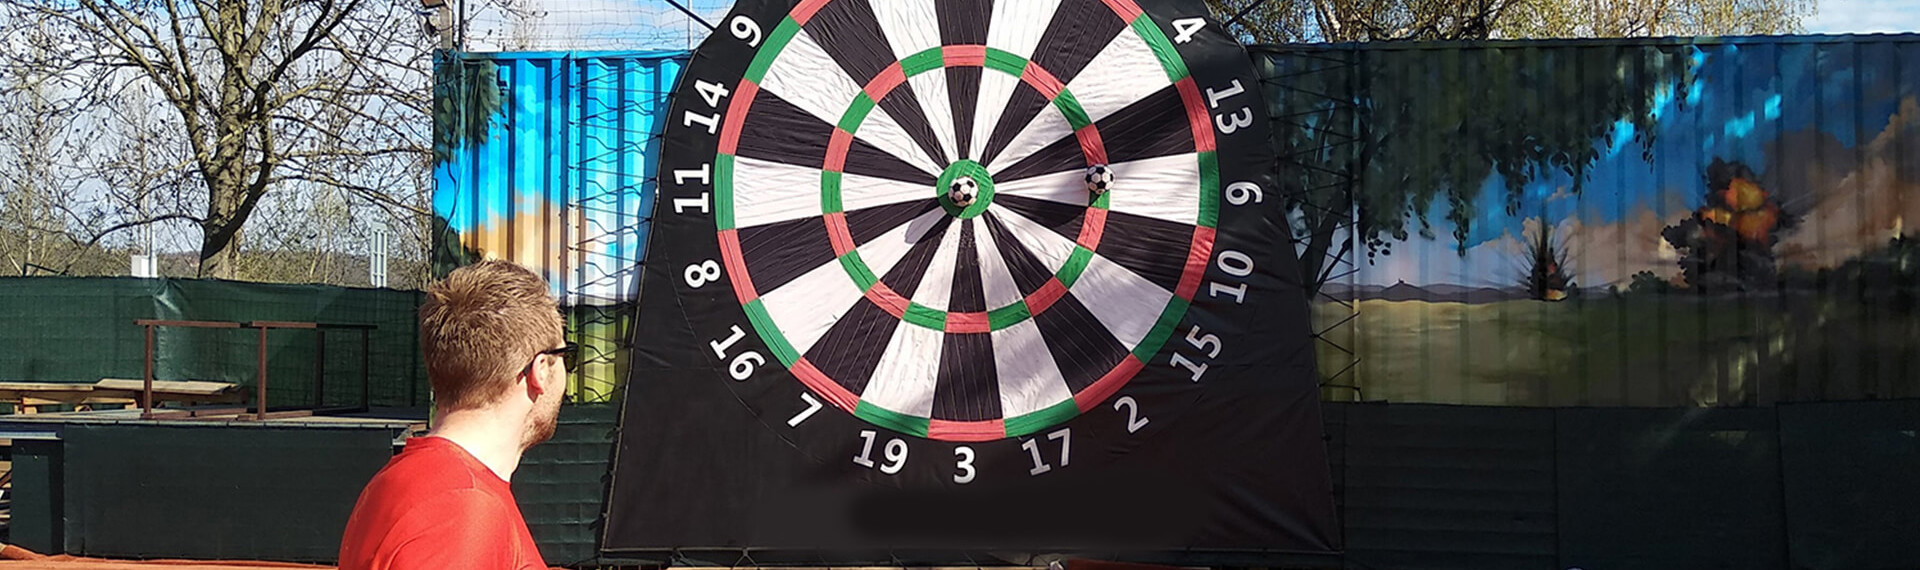 Football Darts in Amsterdam | Pissup | Top Rated Stag Agency on Trustpilot